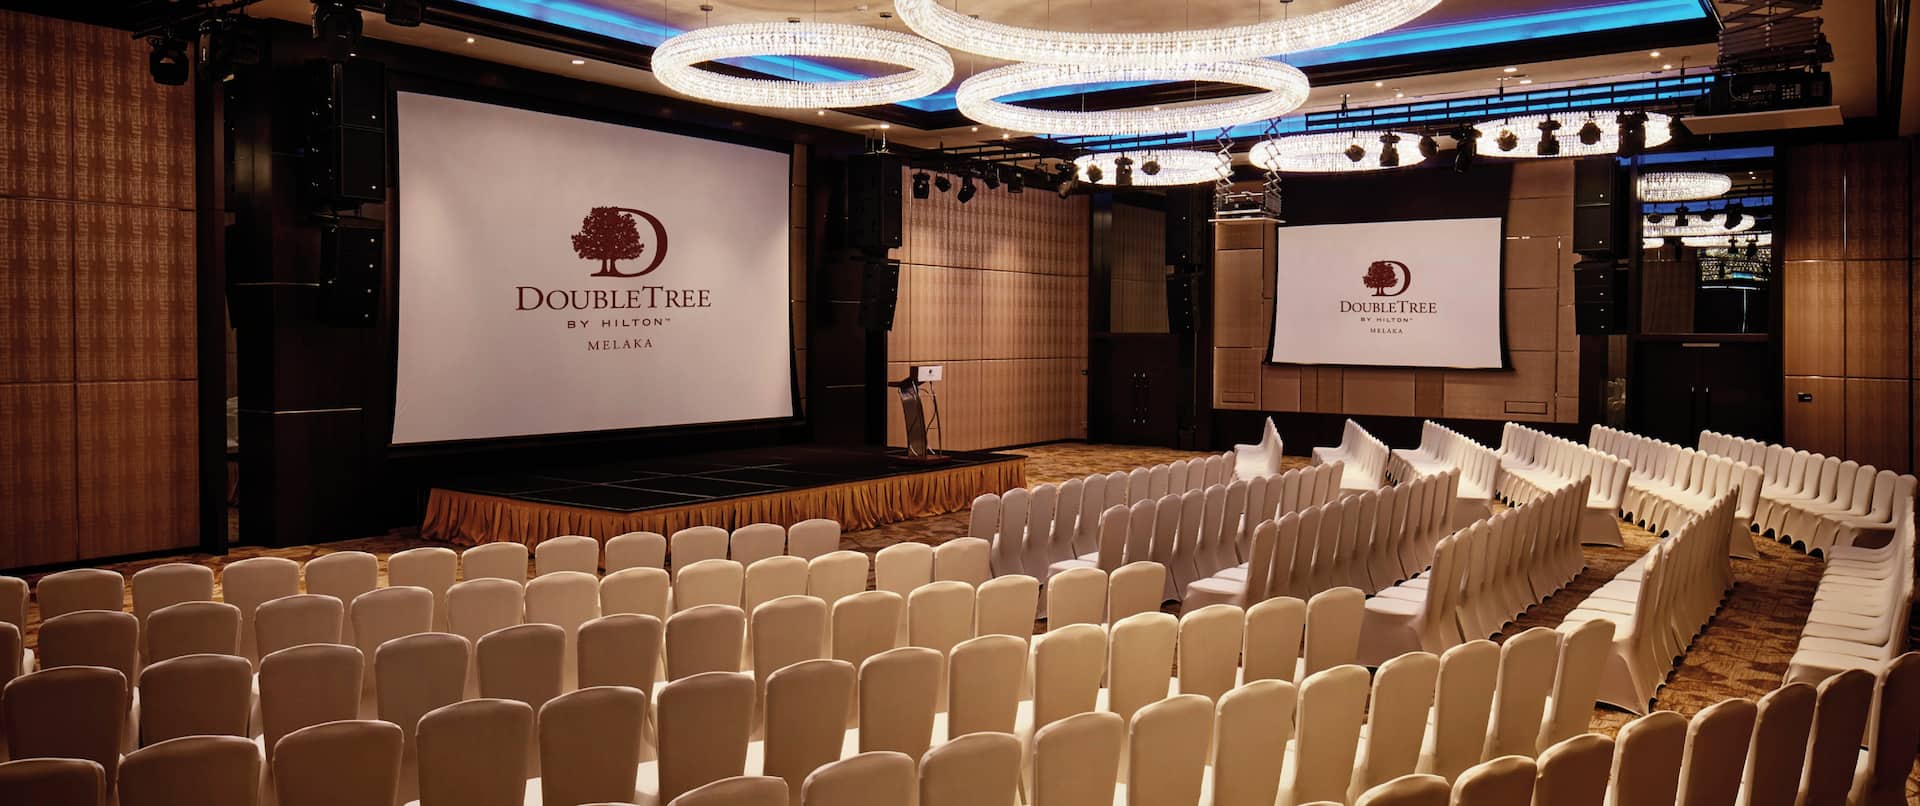 Ballroom Theater Setup with Two Projector Screens